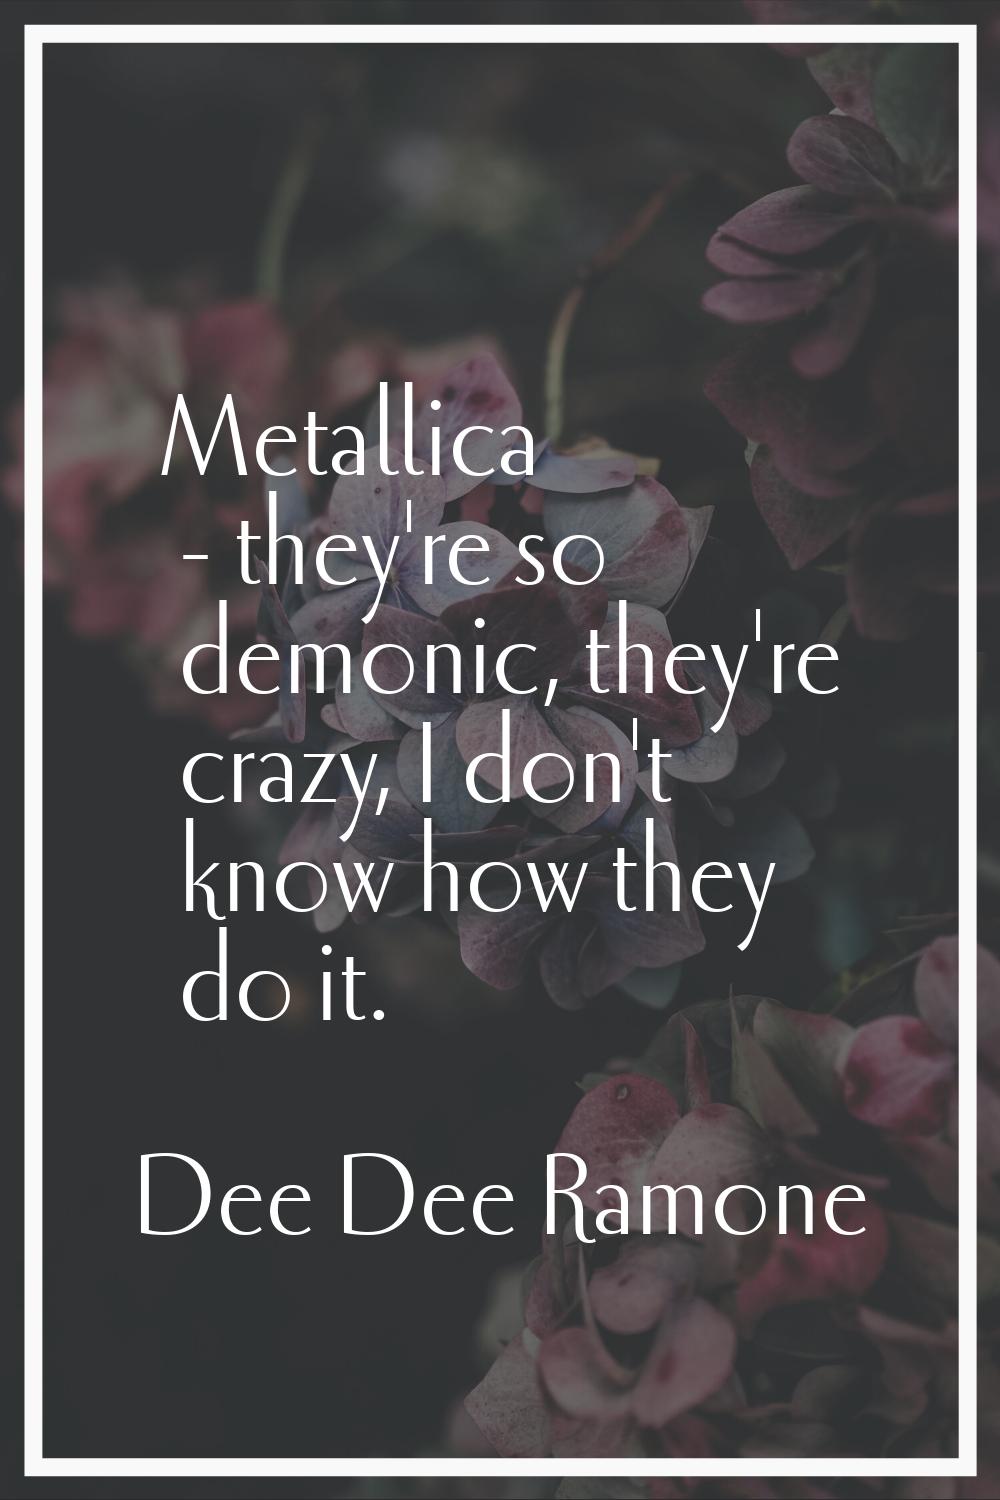 Metallica - they're so demonic, they're crazy, I don't know how they do it.